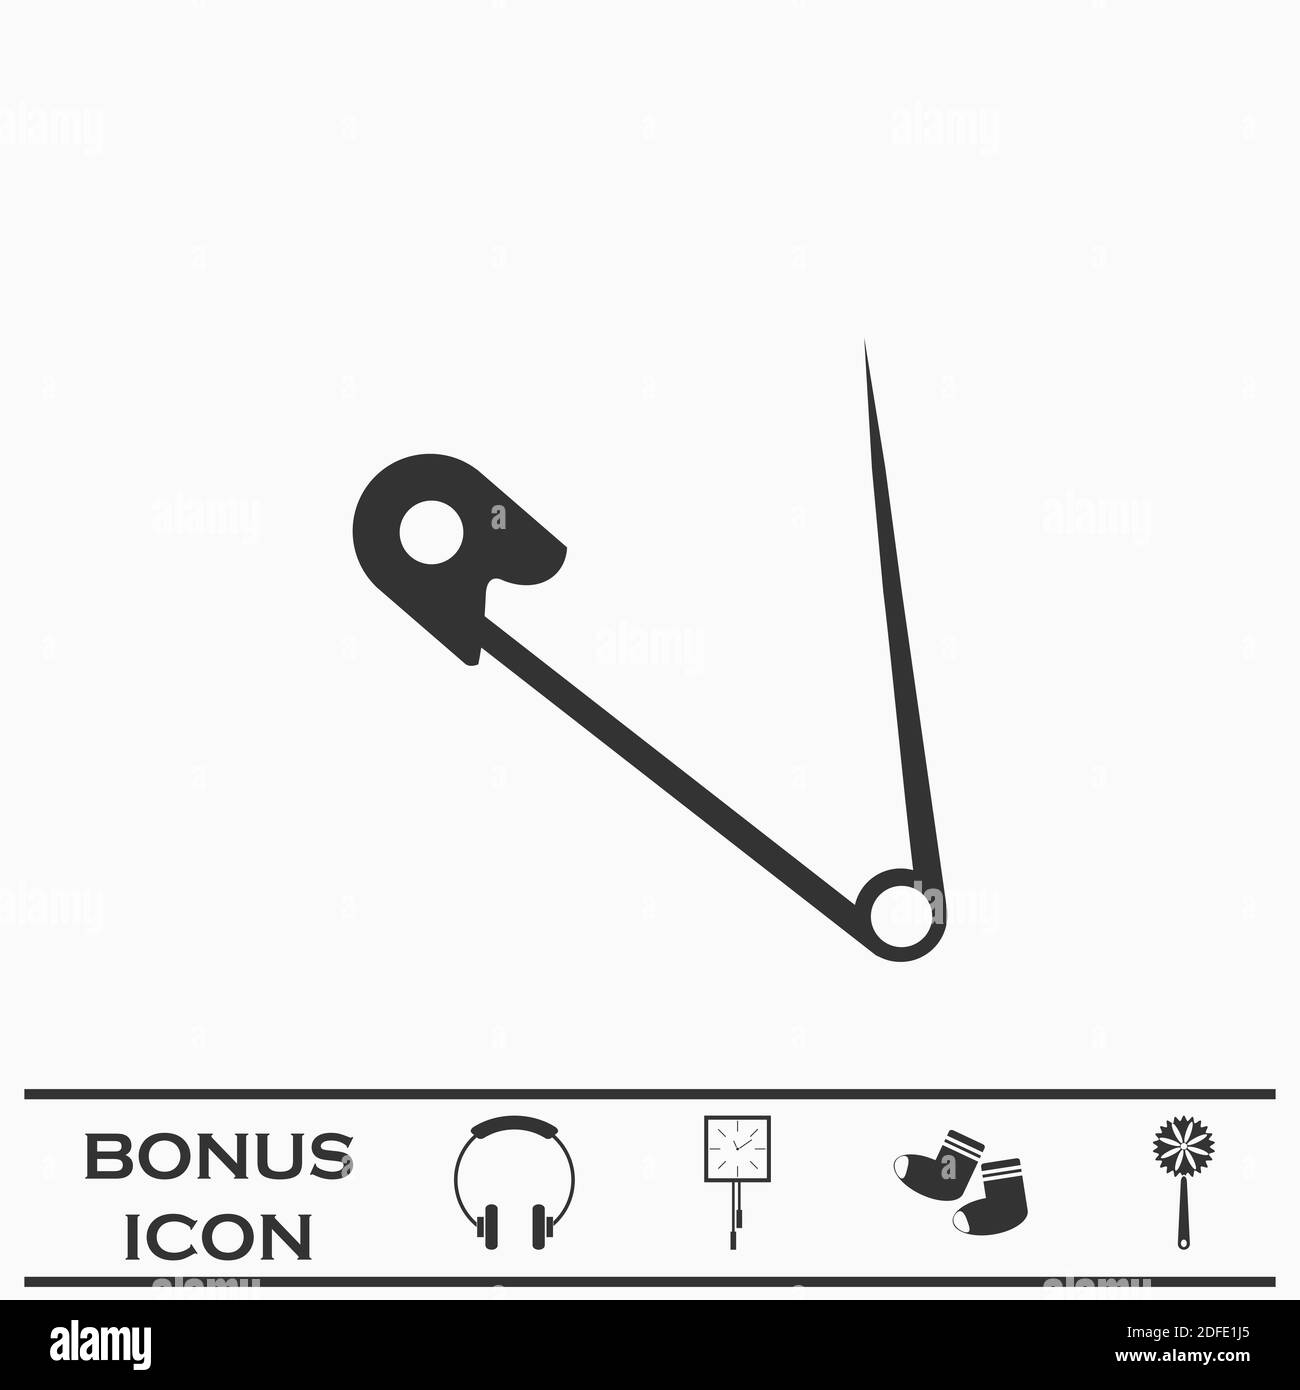 Safety pin icon flat. Black pictogram on white background. Vector illustration symbol and bonus button Stock Vector